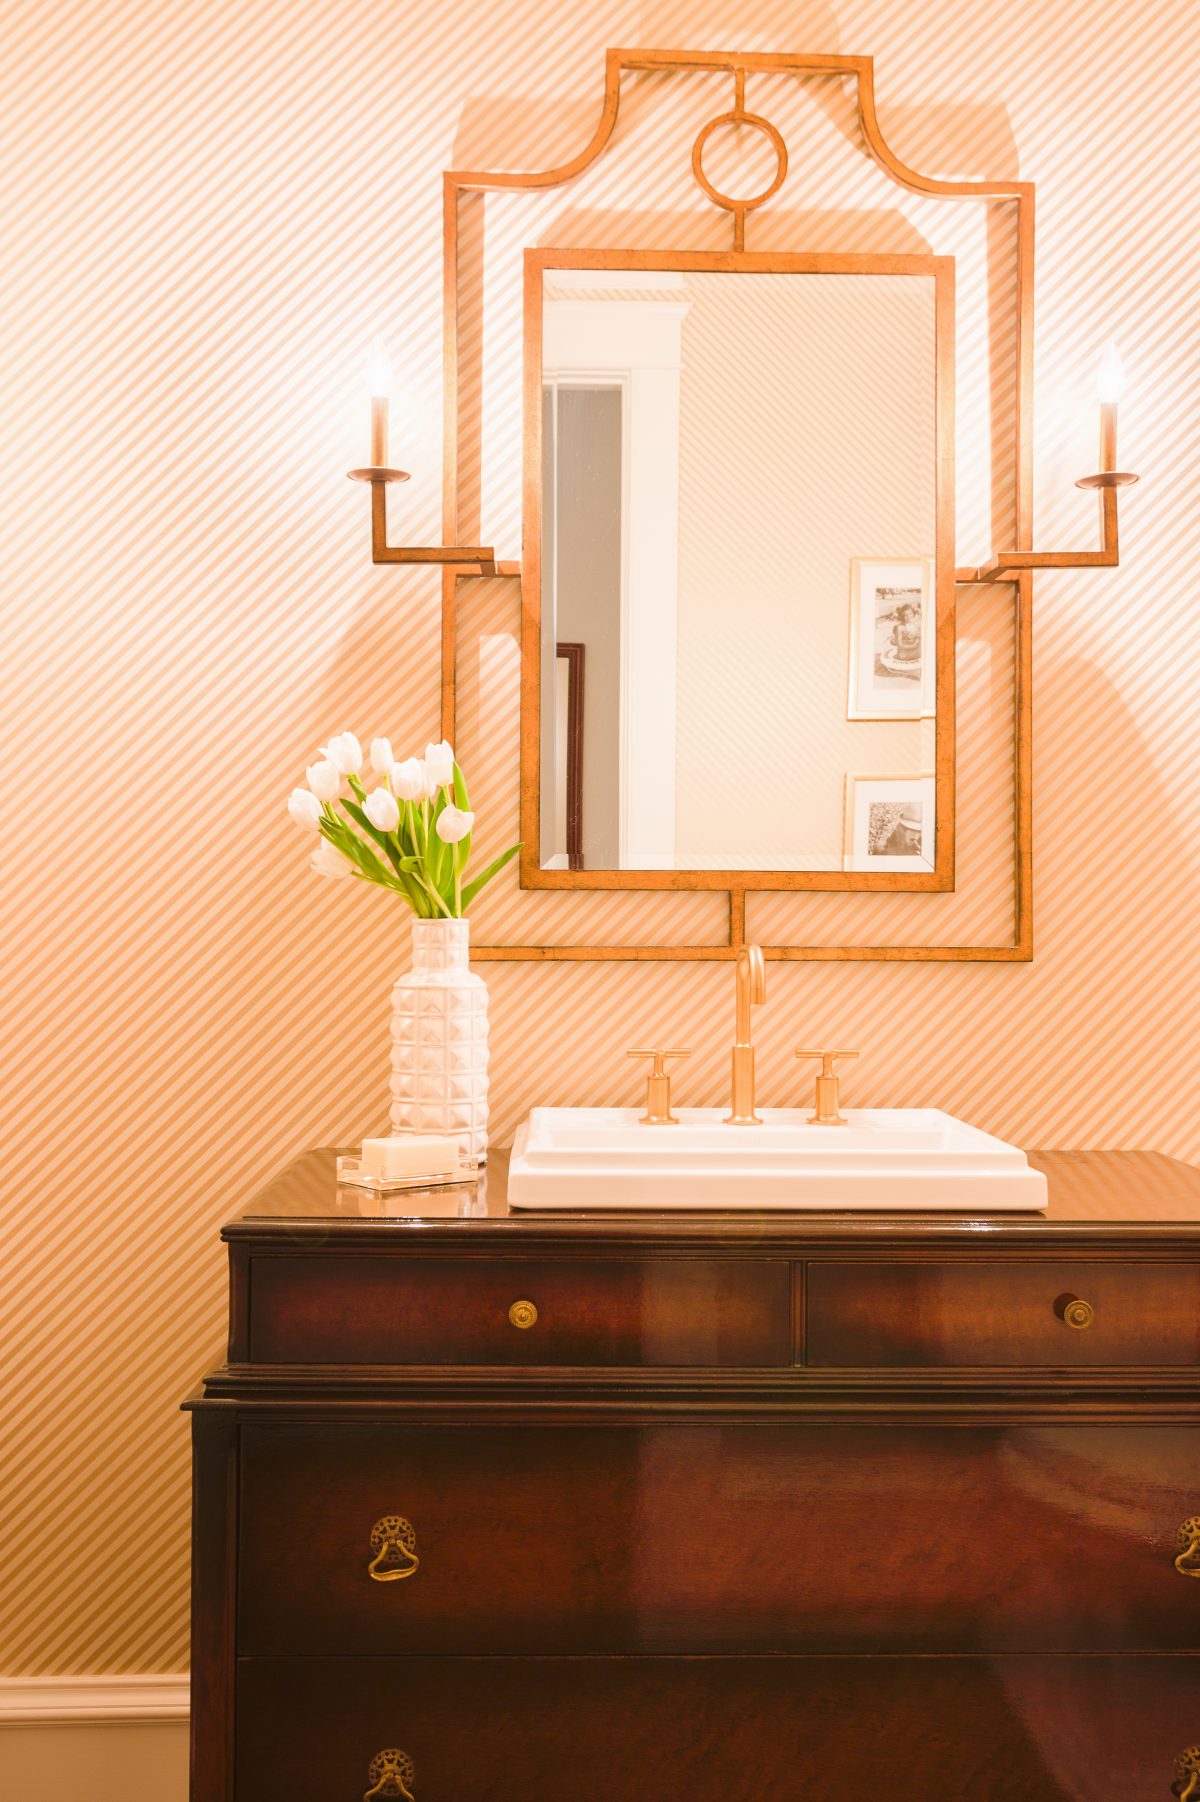 A vintage dresser that wasn't needed in a bedroom was converted into a bathroom vanity in this powder room designed by Laura Burleson Interiors. (Alyssa Rosenheck/Laura Burleson Interiors via AP) 